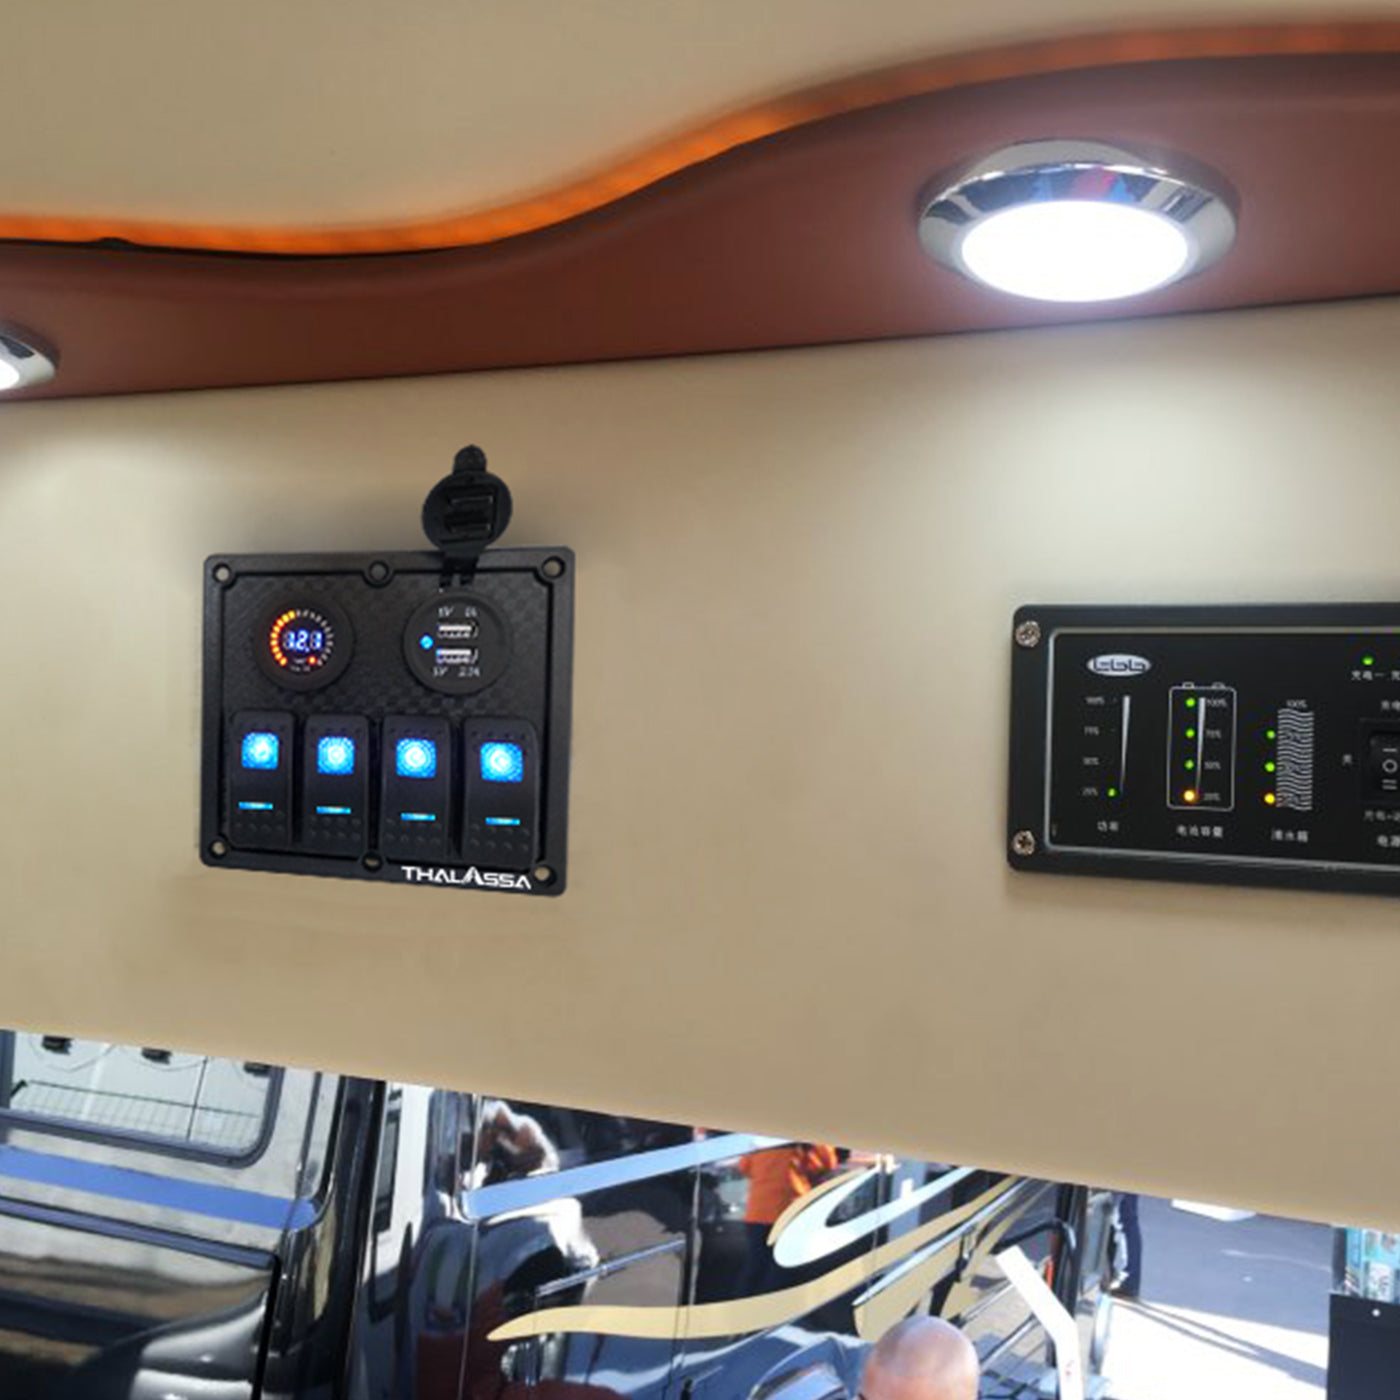 swtich panel for rv